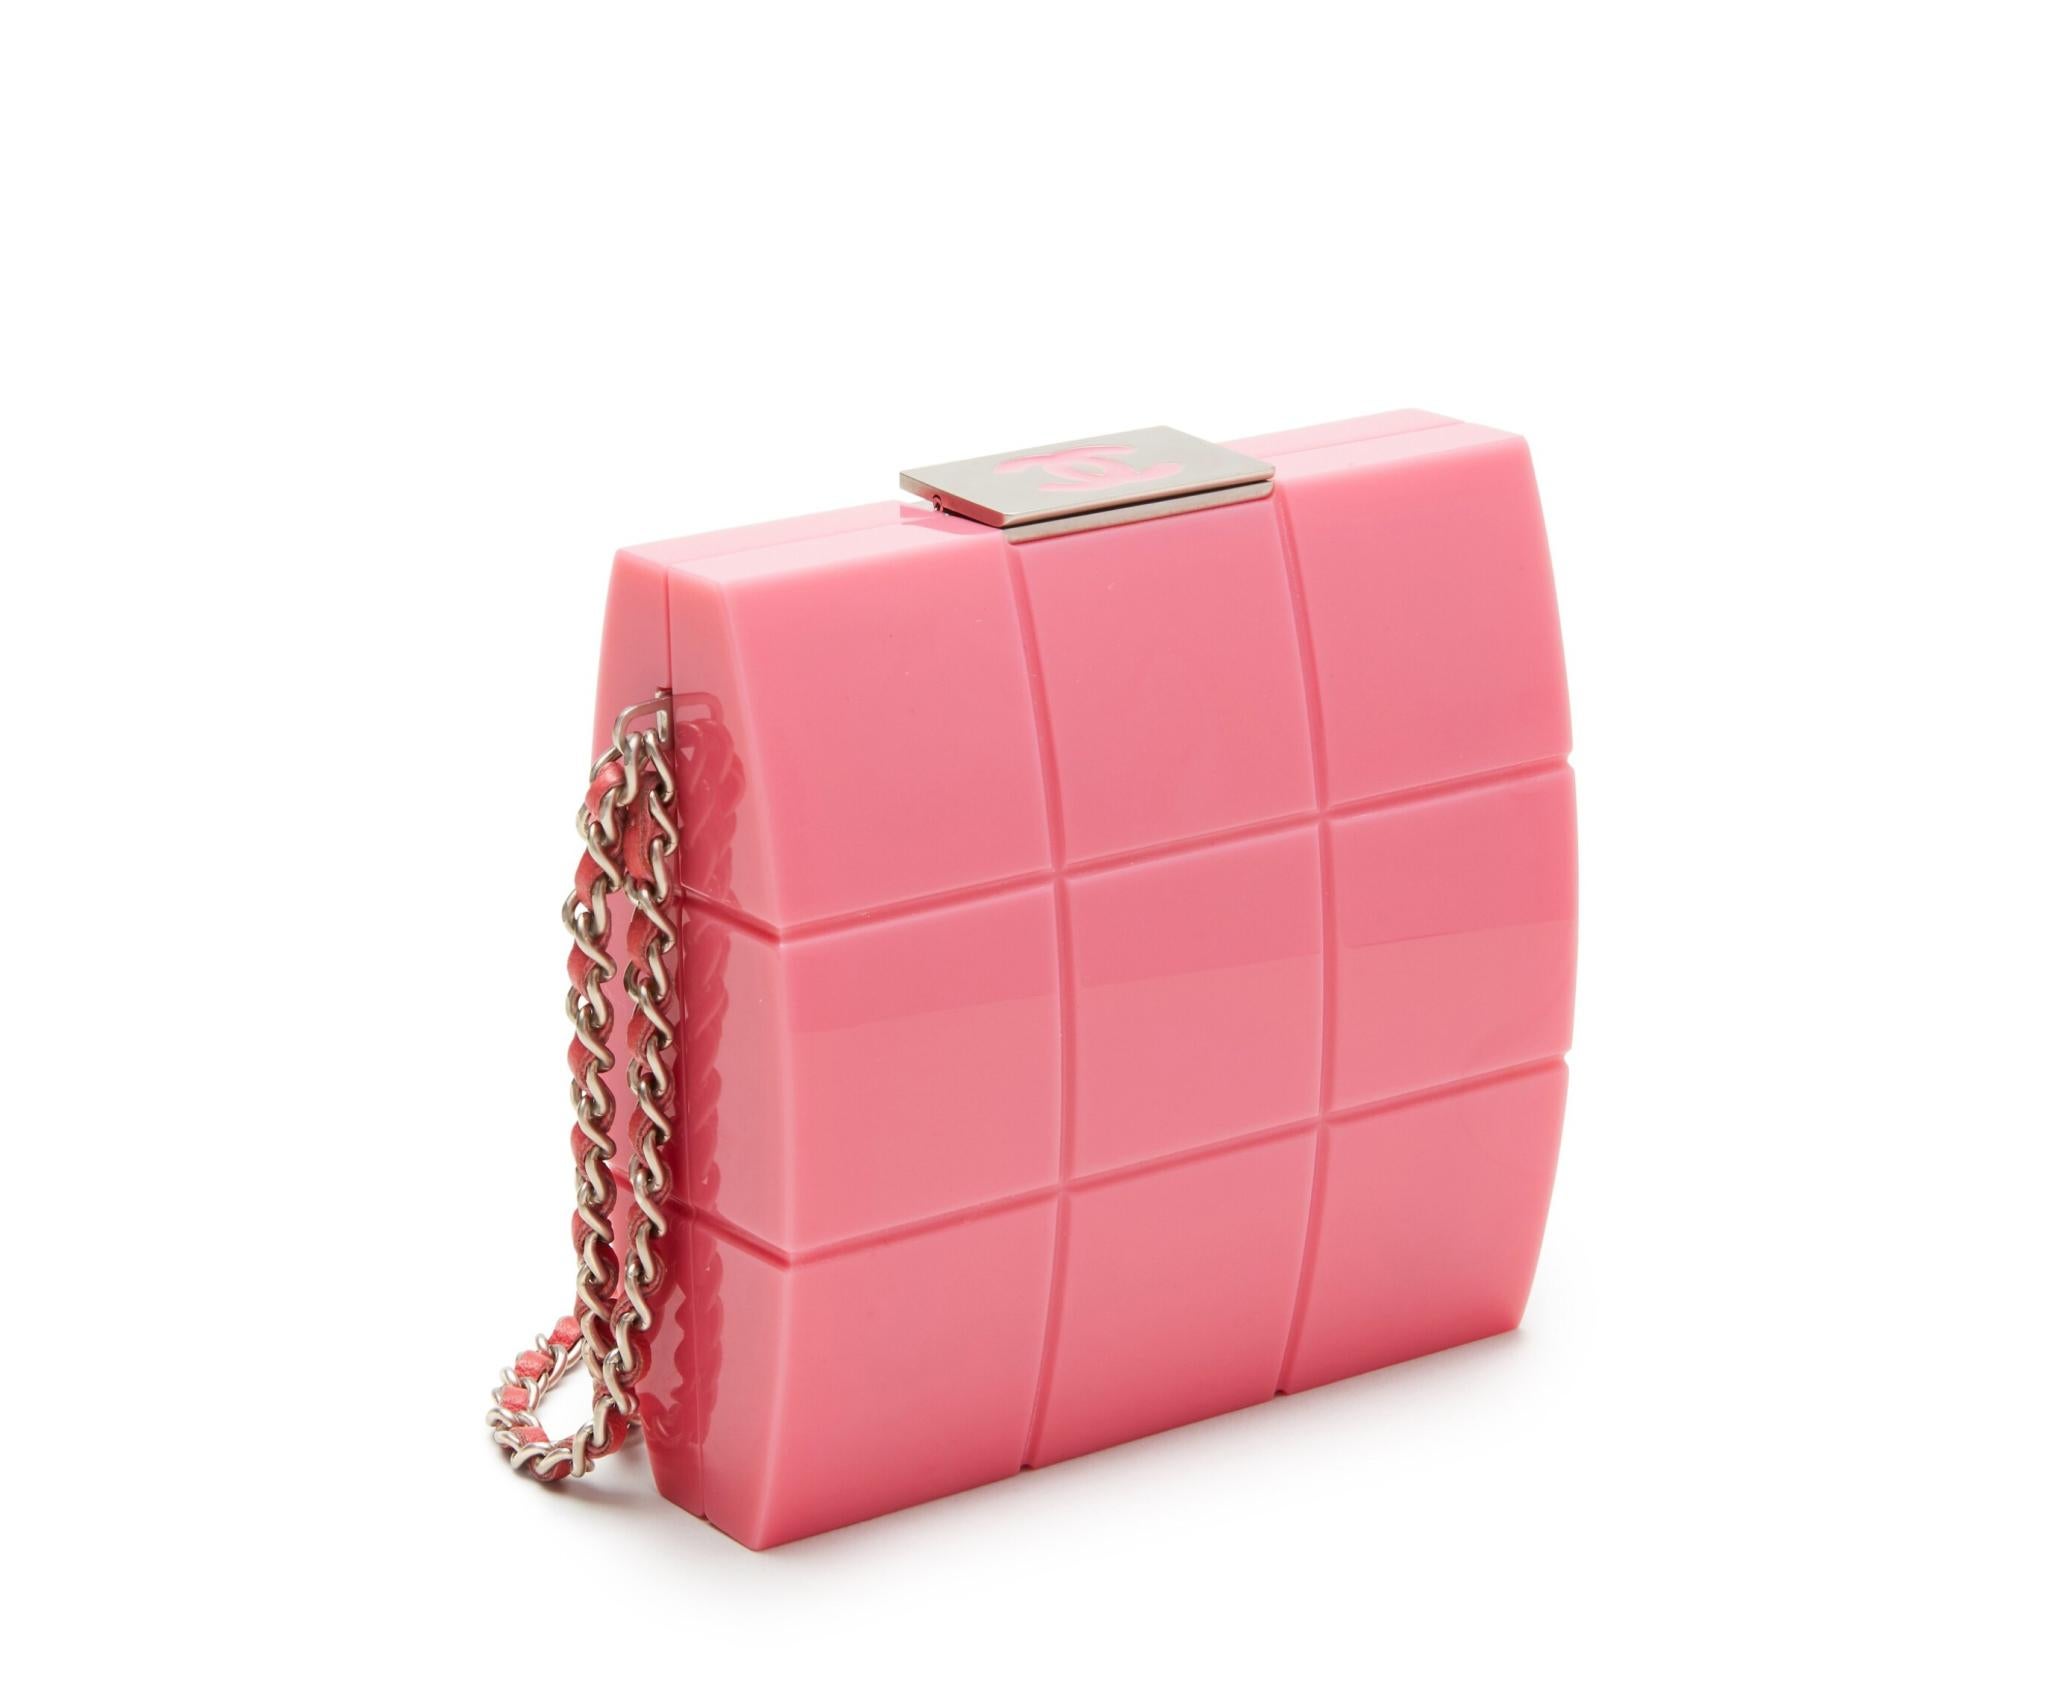 Chanel Pink Choco Bar Minaudière Clutch Bag 2002 In Excellent Condition For Sale In London, GB